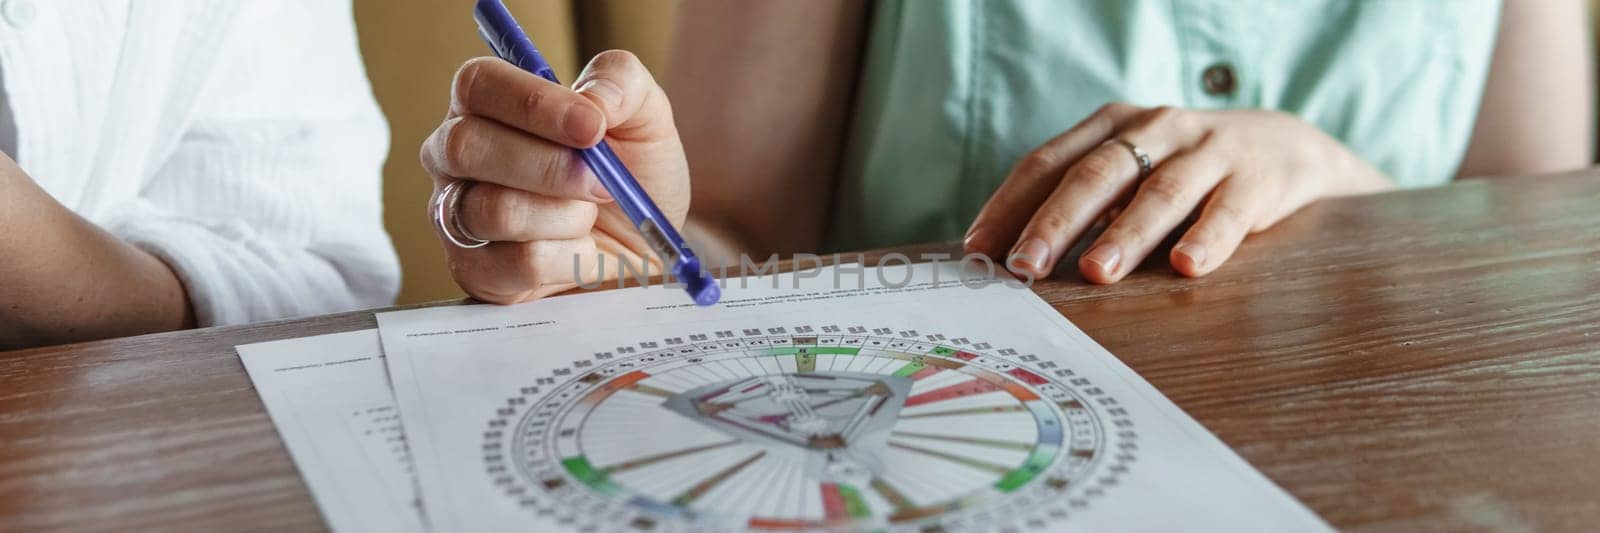 Tver, Russia - August 2, 2021. A woman in a cafe at a table is studying the design of a person. The concept of studying esoteric sciences. A bodigraph or a map of a person on an A4 sheet. by Annu1tochka